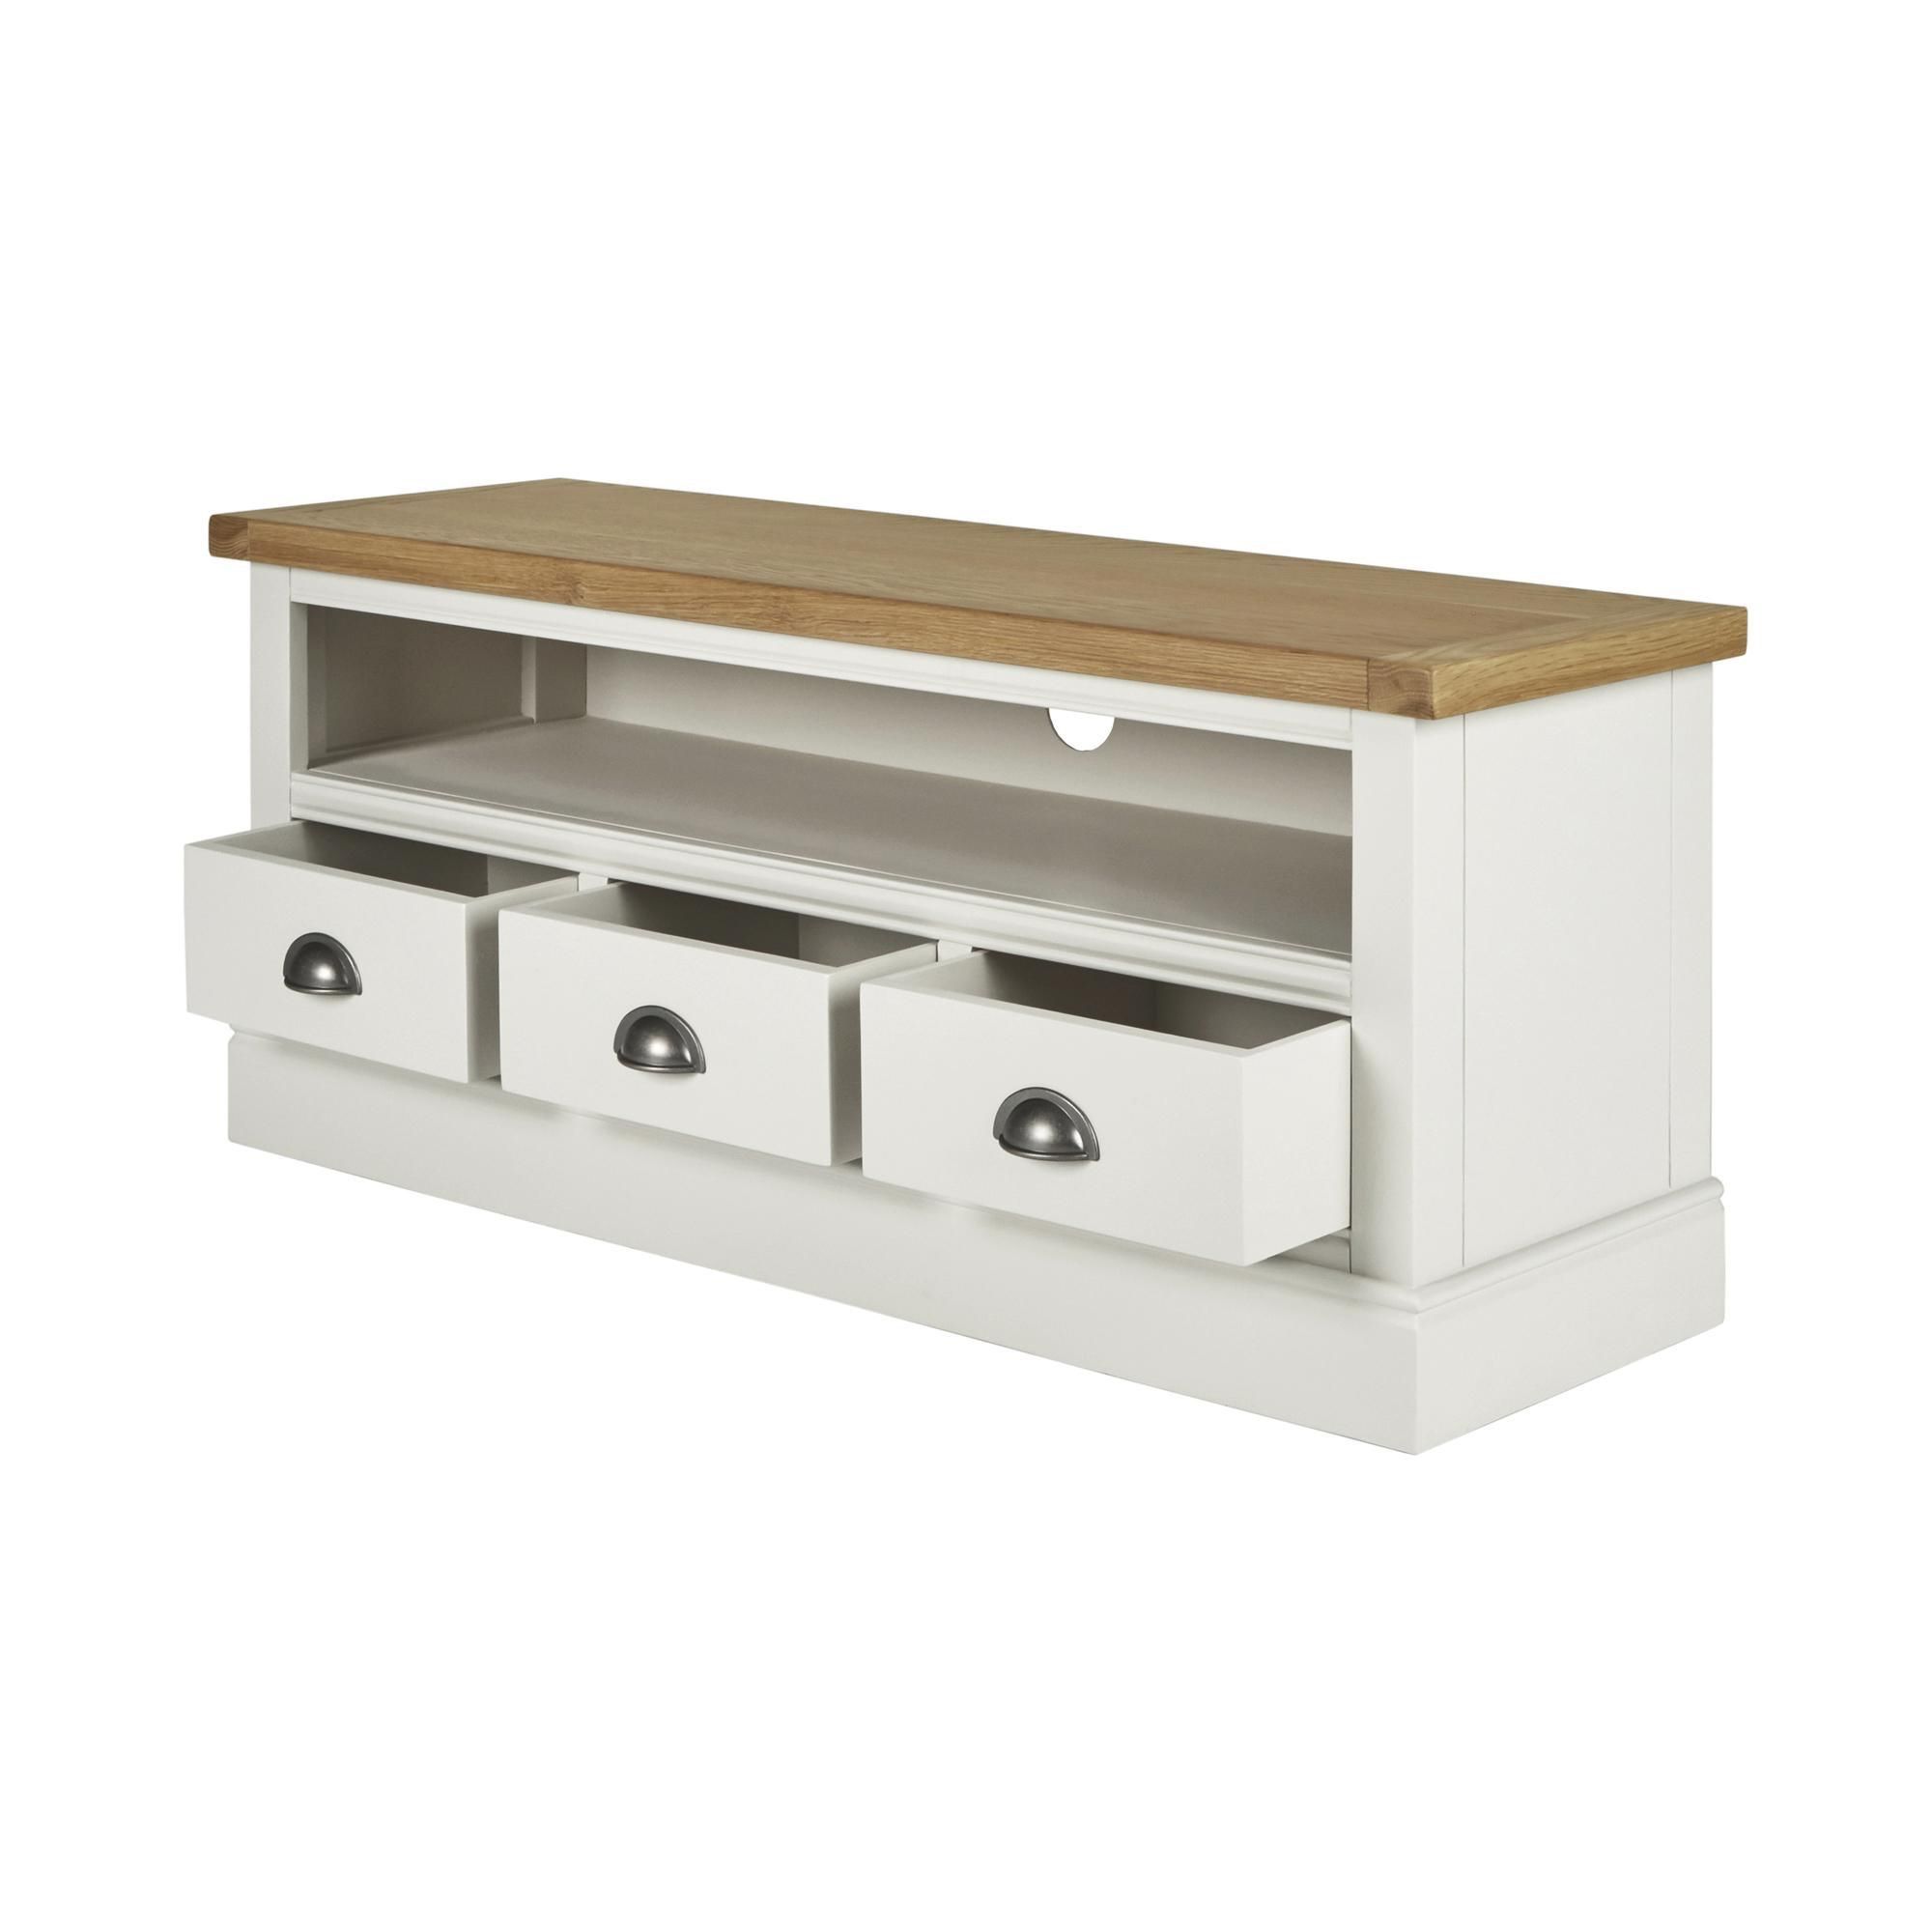 Compton Ivory Large Tv Stands With Storage (View 5 of 7)